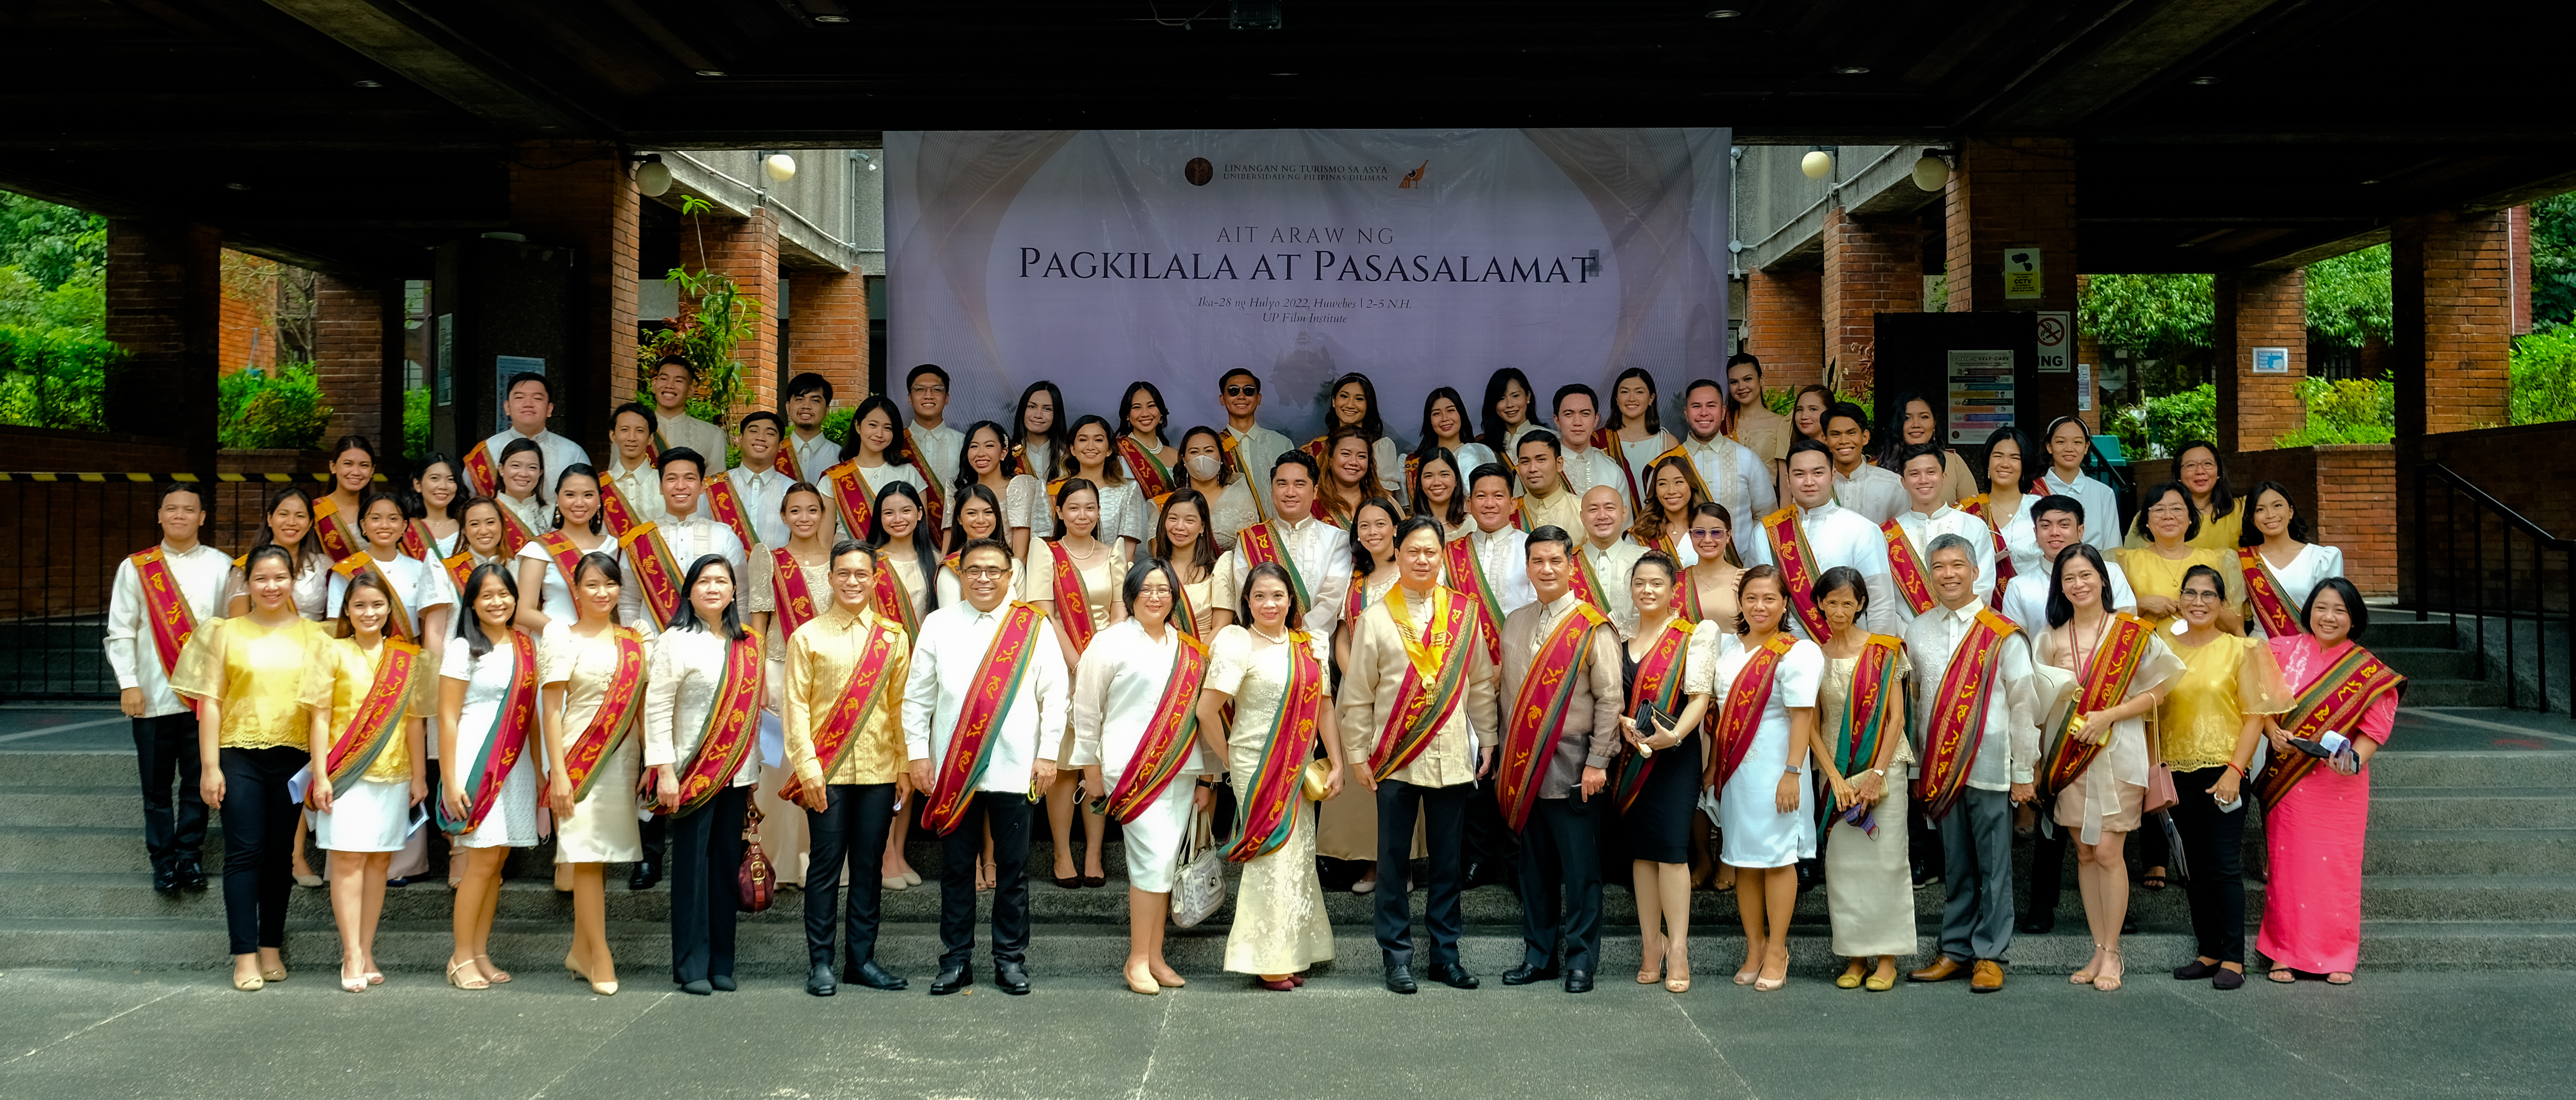 masters in tourism management philippines